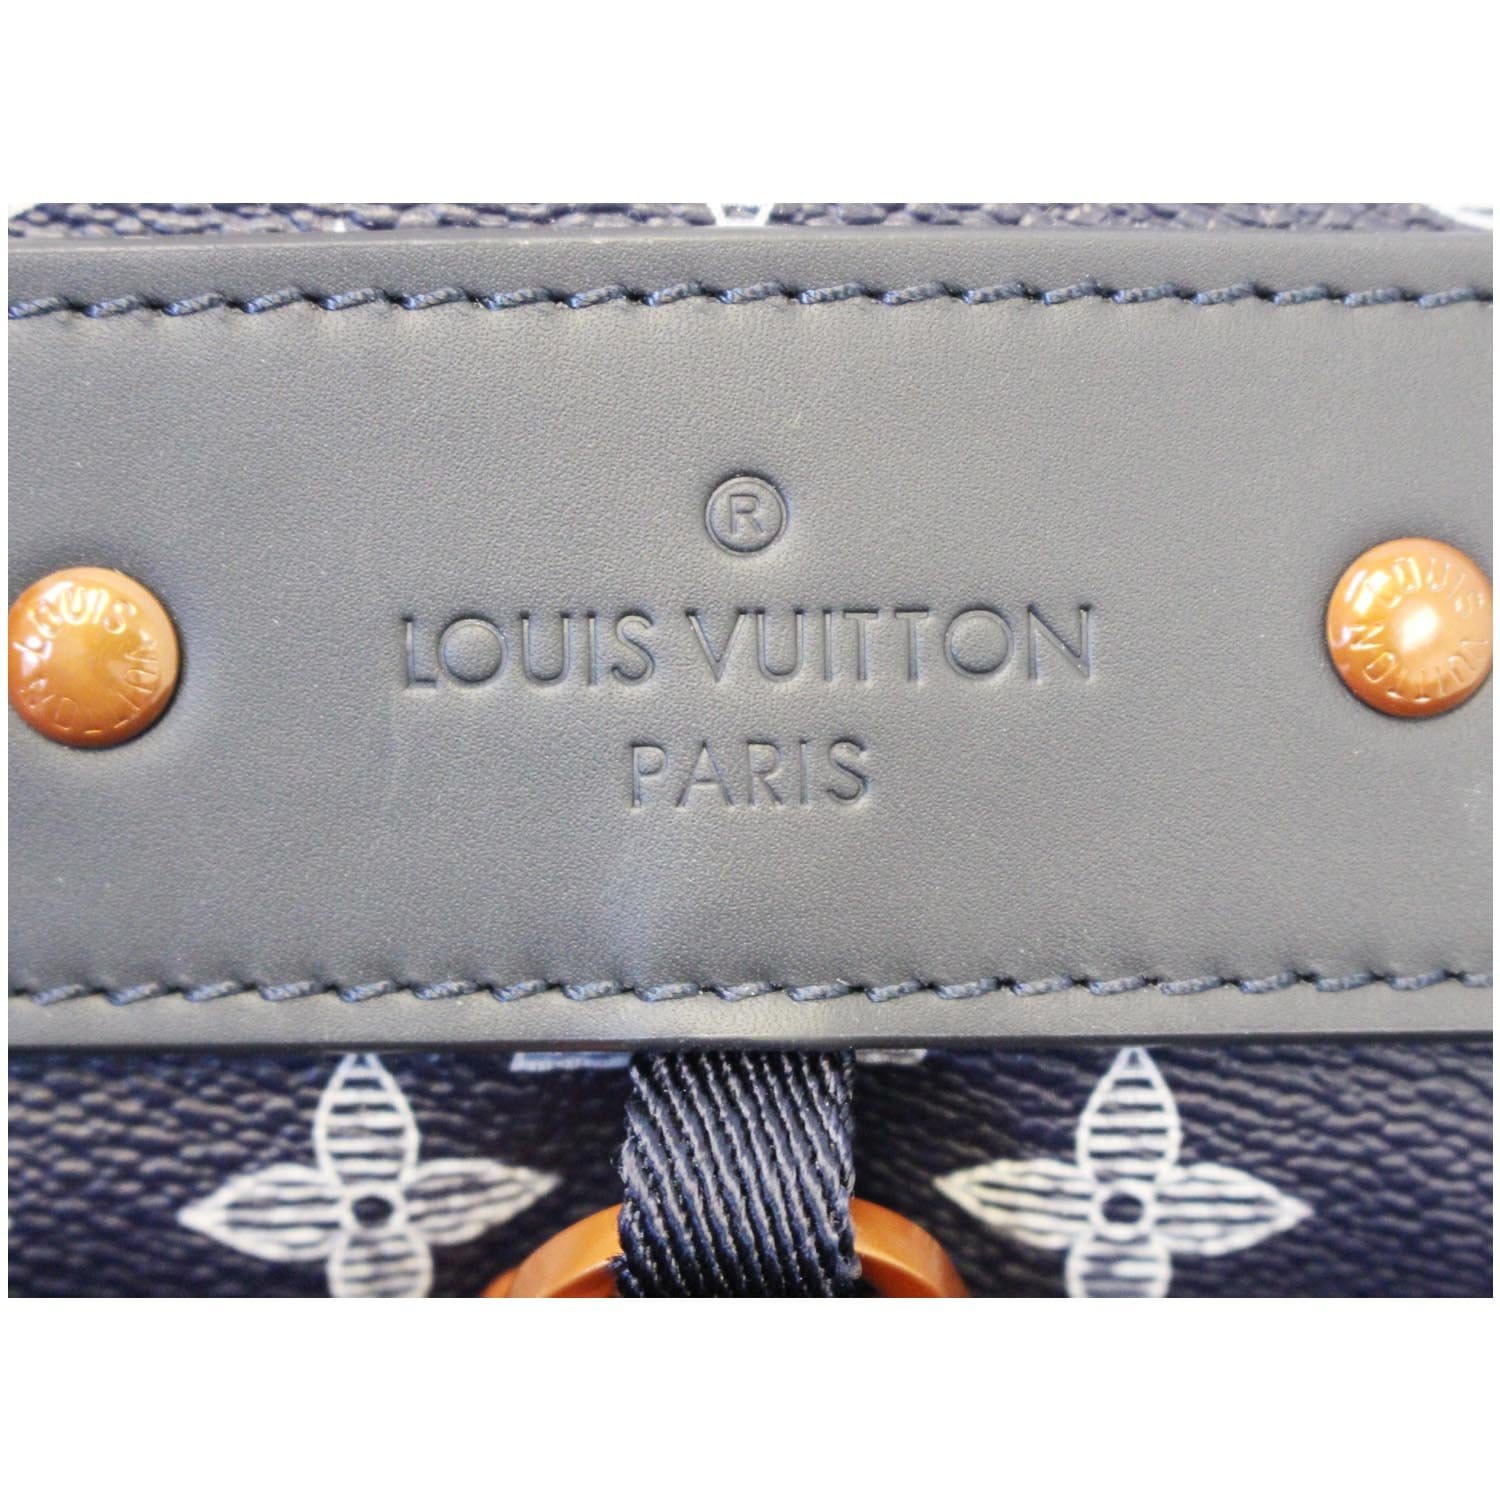 BACKDOOR 👟 on Instagram: New Items From Louis Vuitton Now